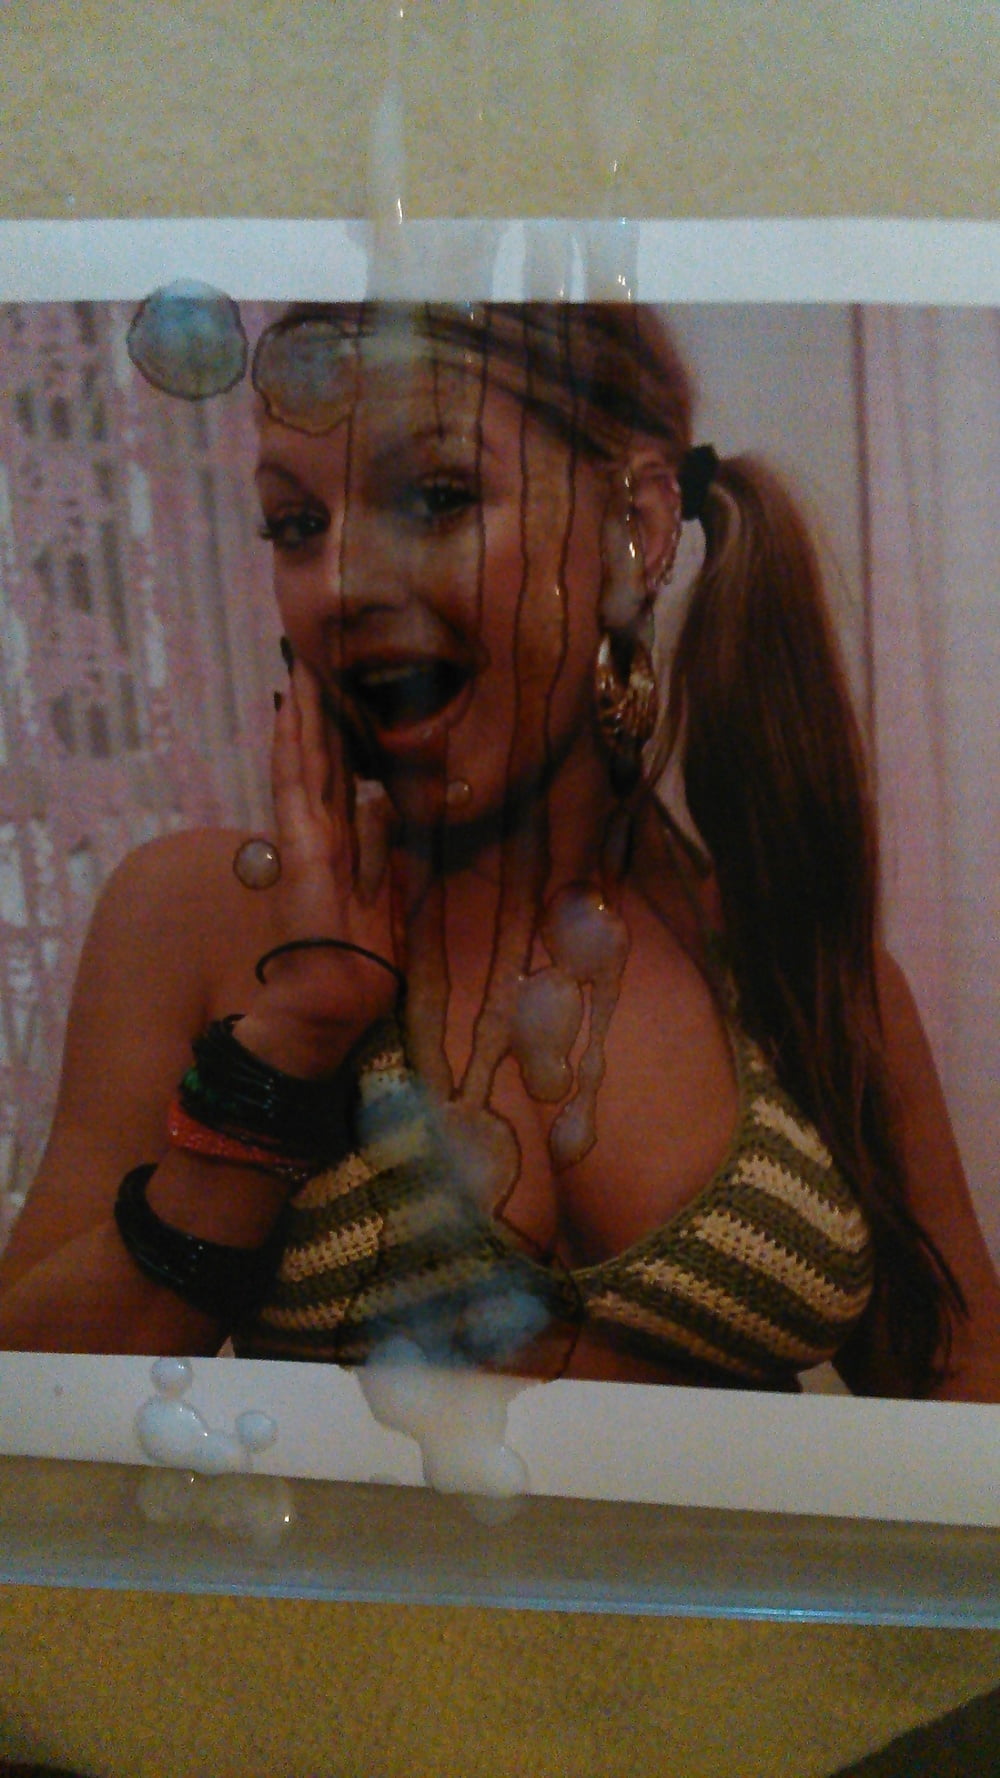 Fergie Cumtribute 1 Pics Xhamster